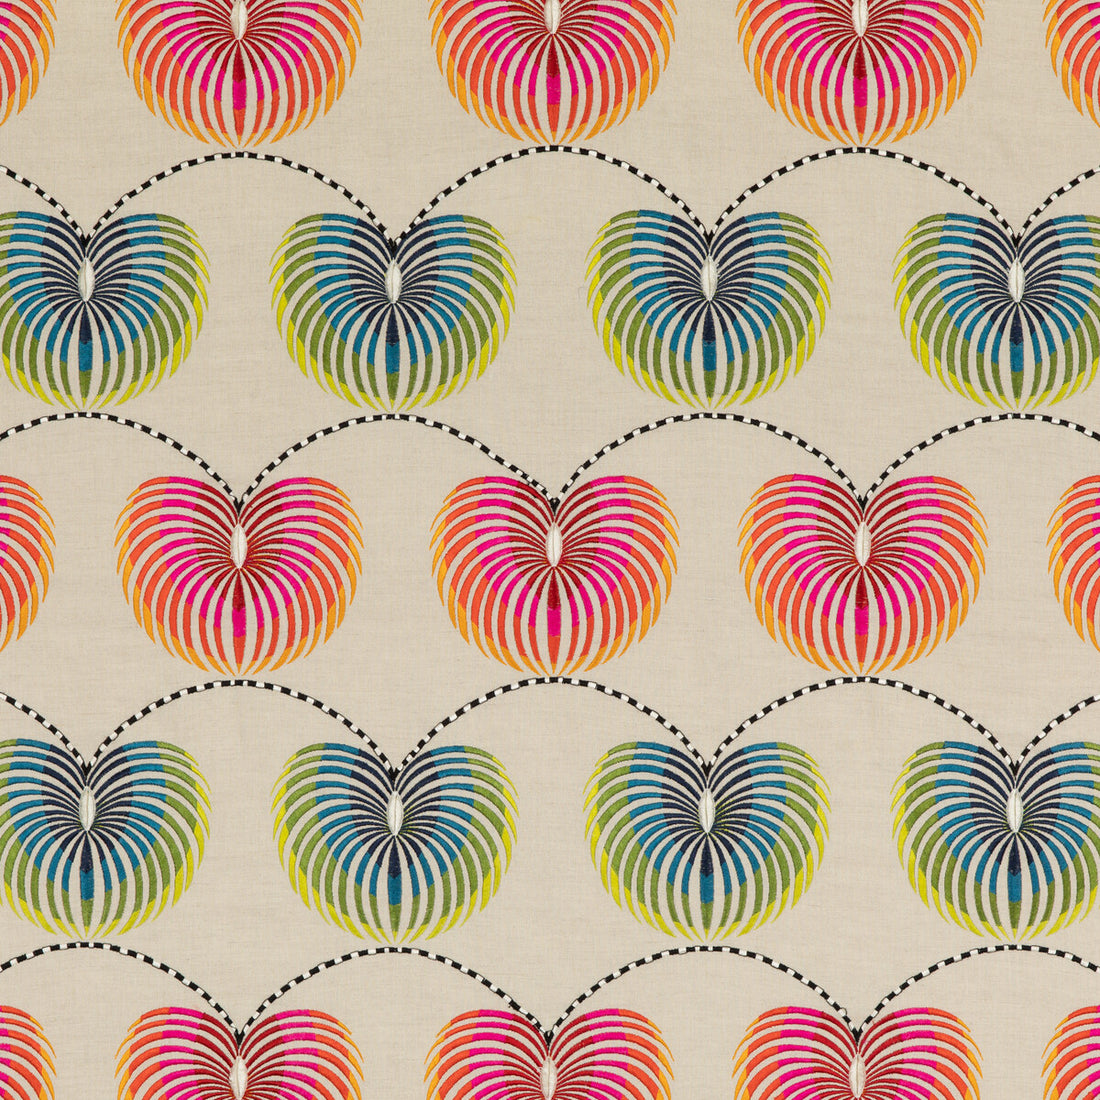 Lanterns fabric in tutti frutti color - pattern PF50469.1.0 - by Baker Lifestyle in the Fiesta collection